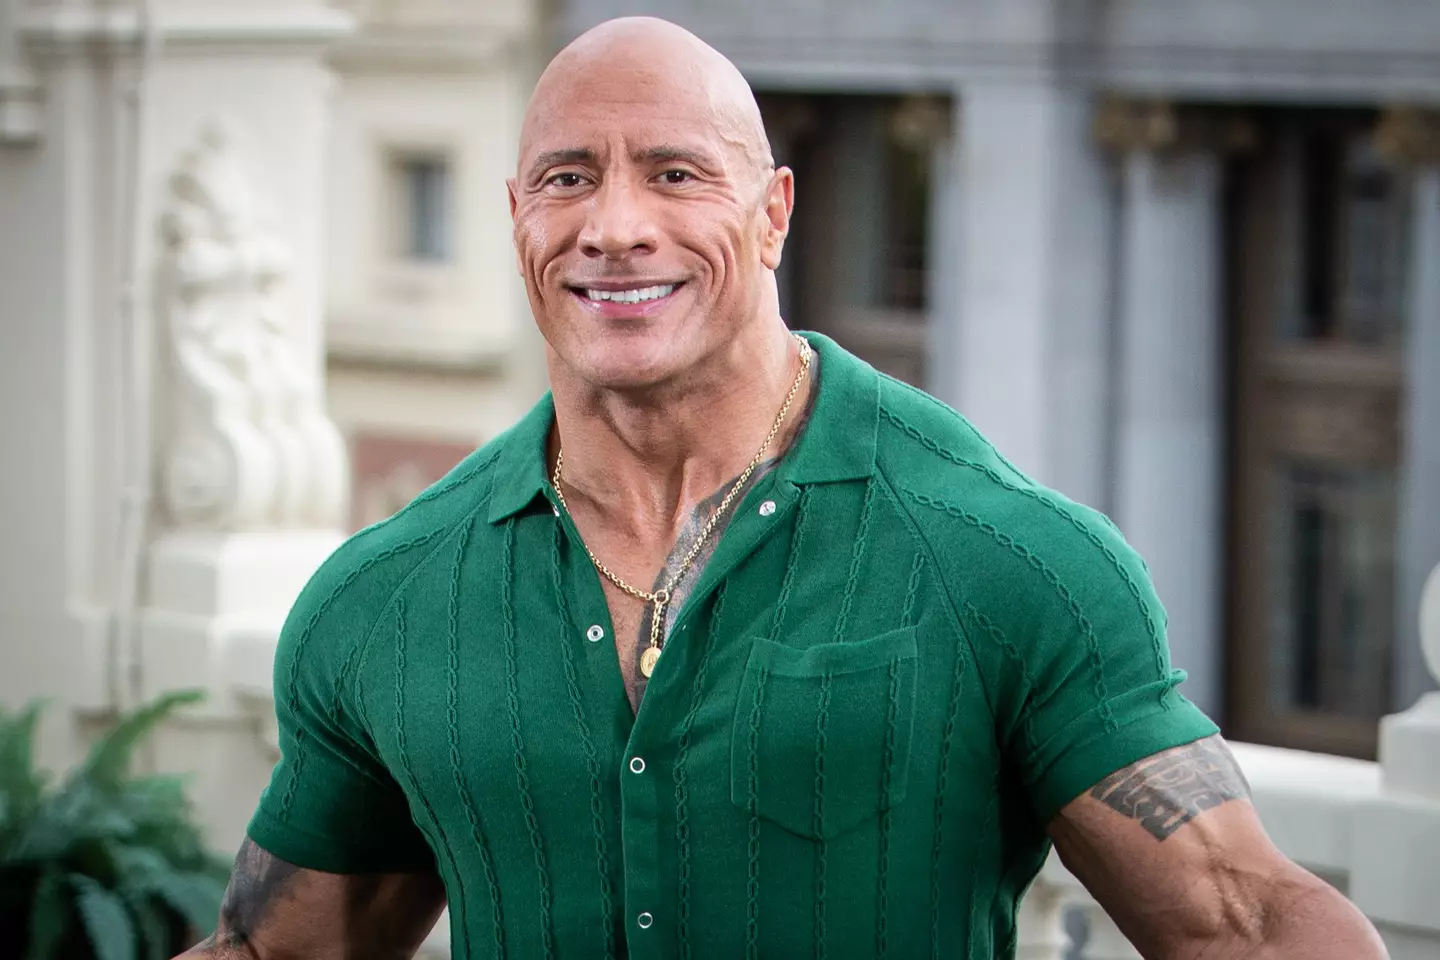 Dwayne Johnson opened up about fame.